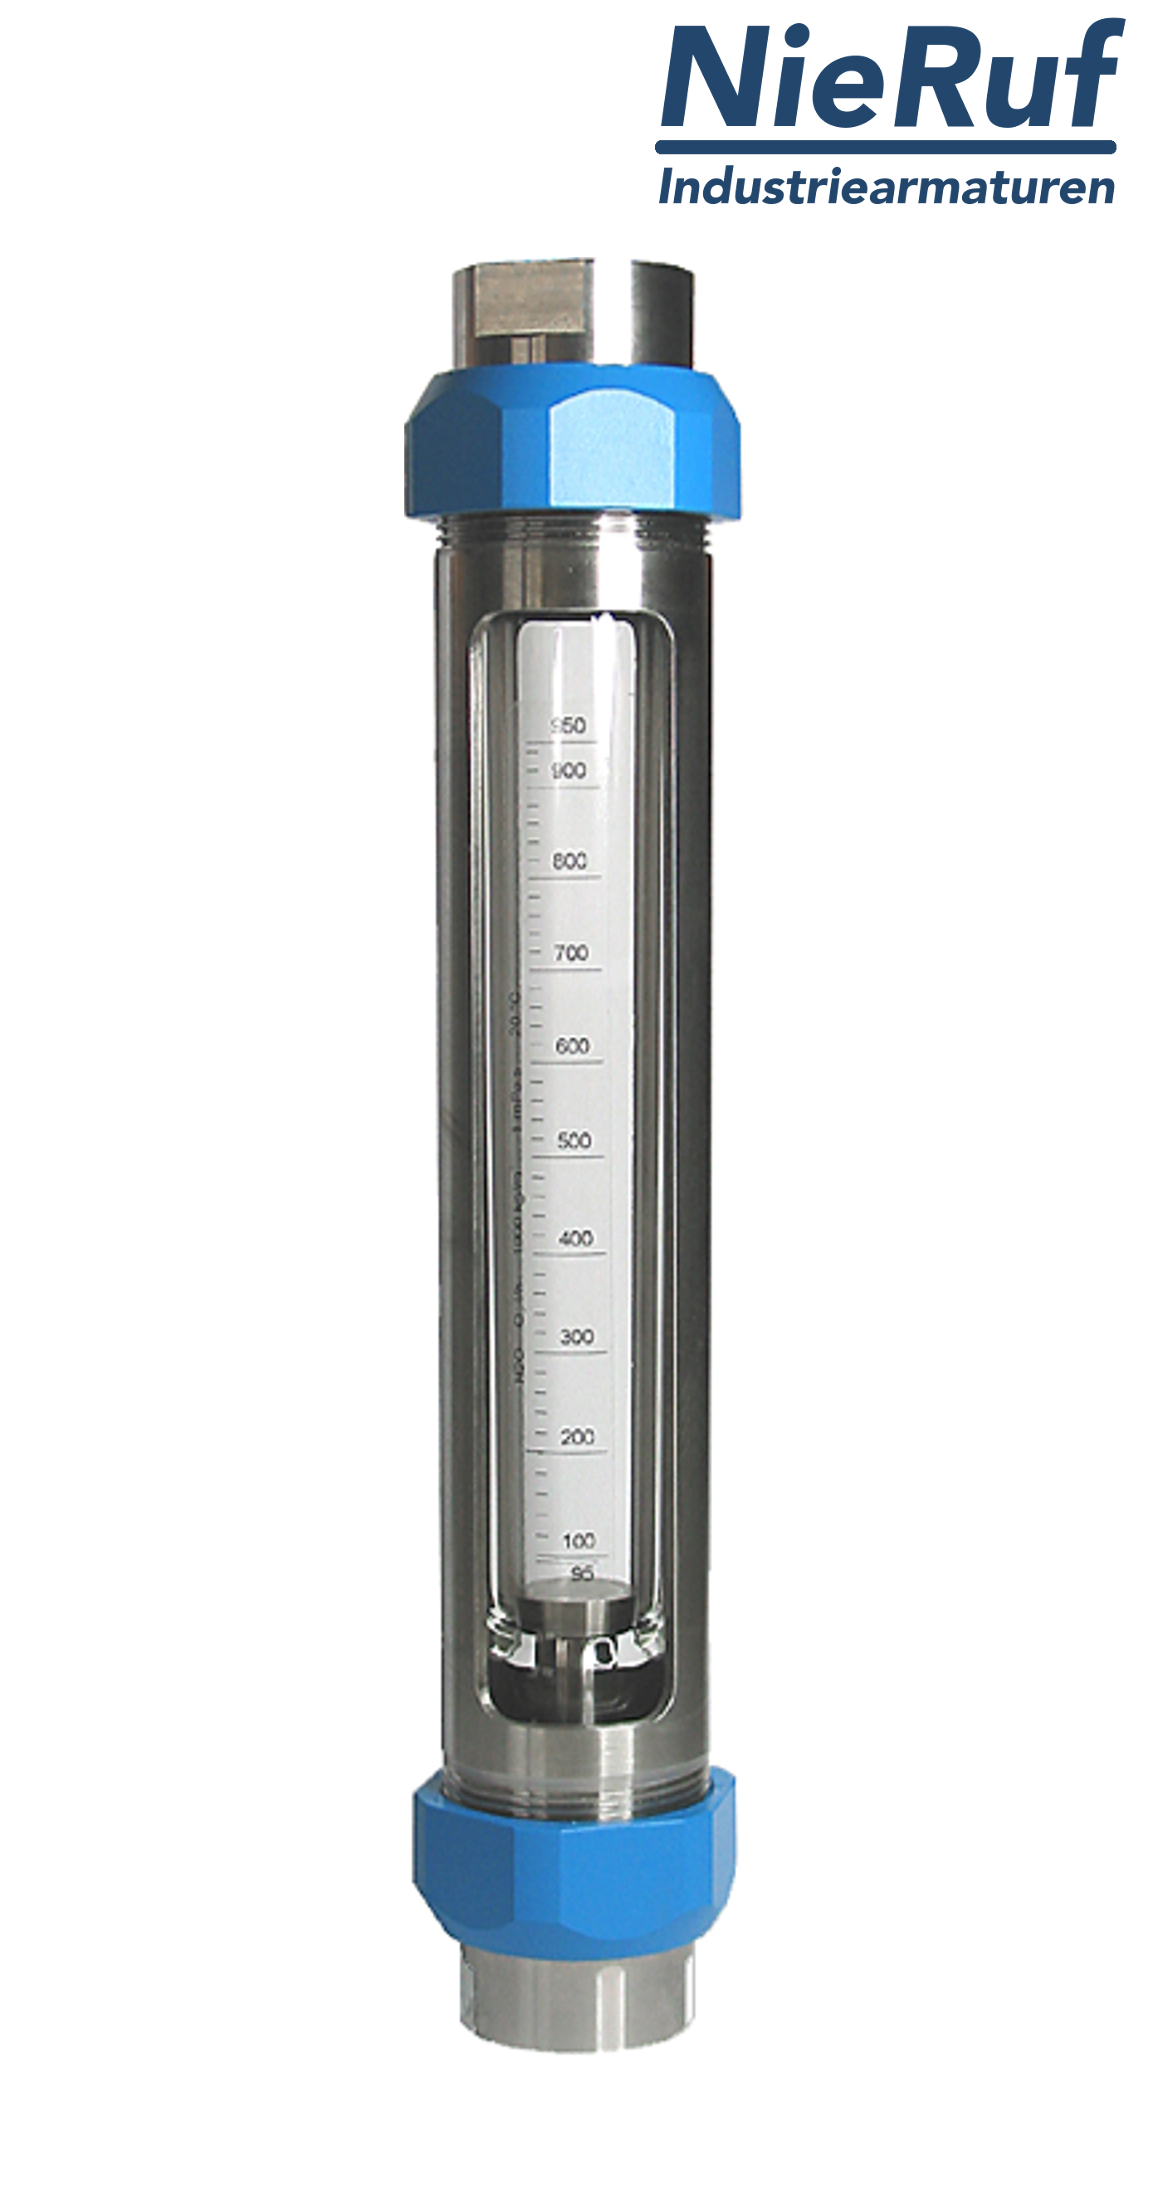 Variable area flowmeter stainless steel + borosilicate 3/4" inch 300.0 - 3000 l/h water EPDM